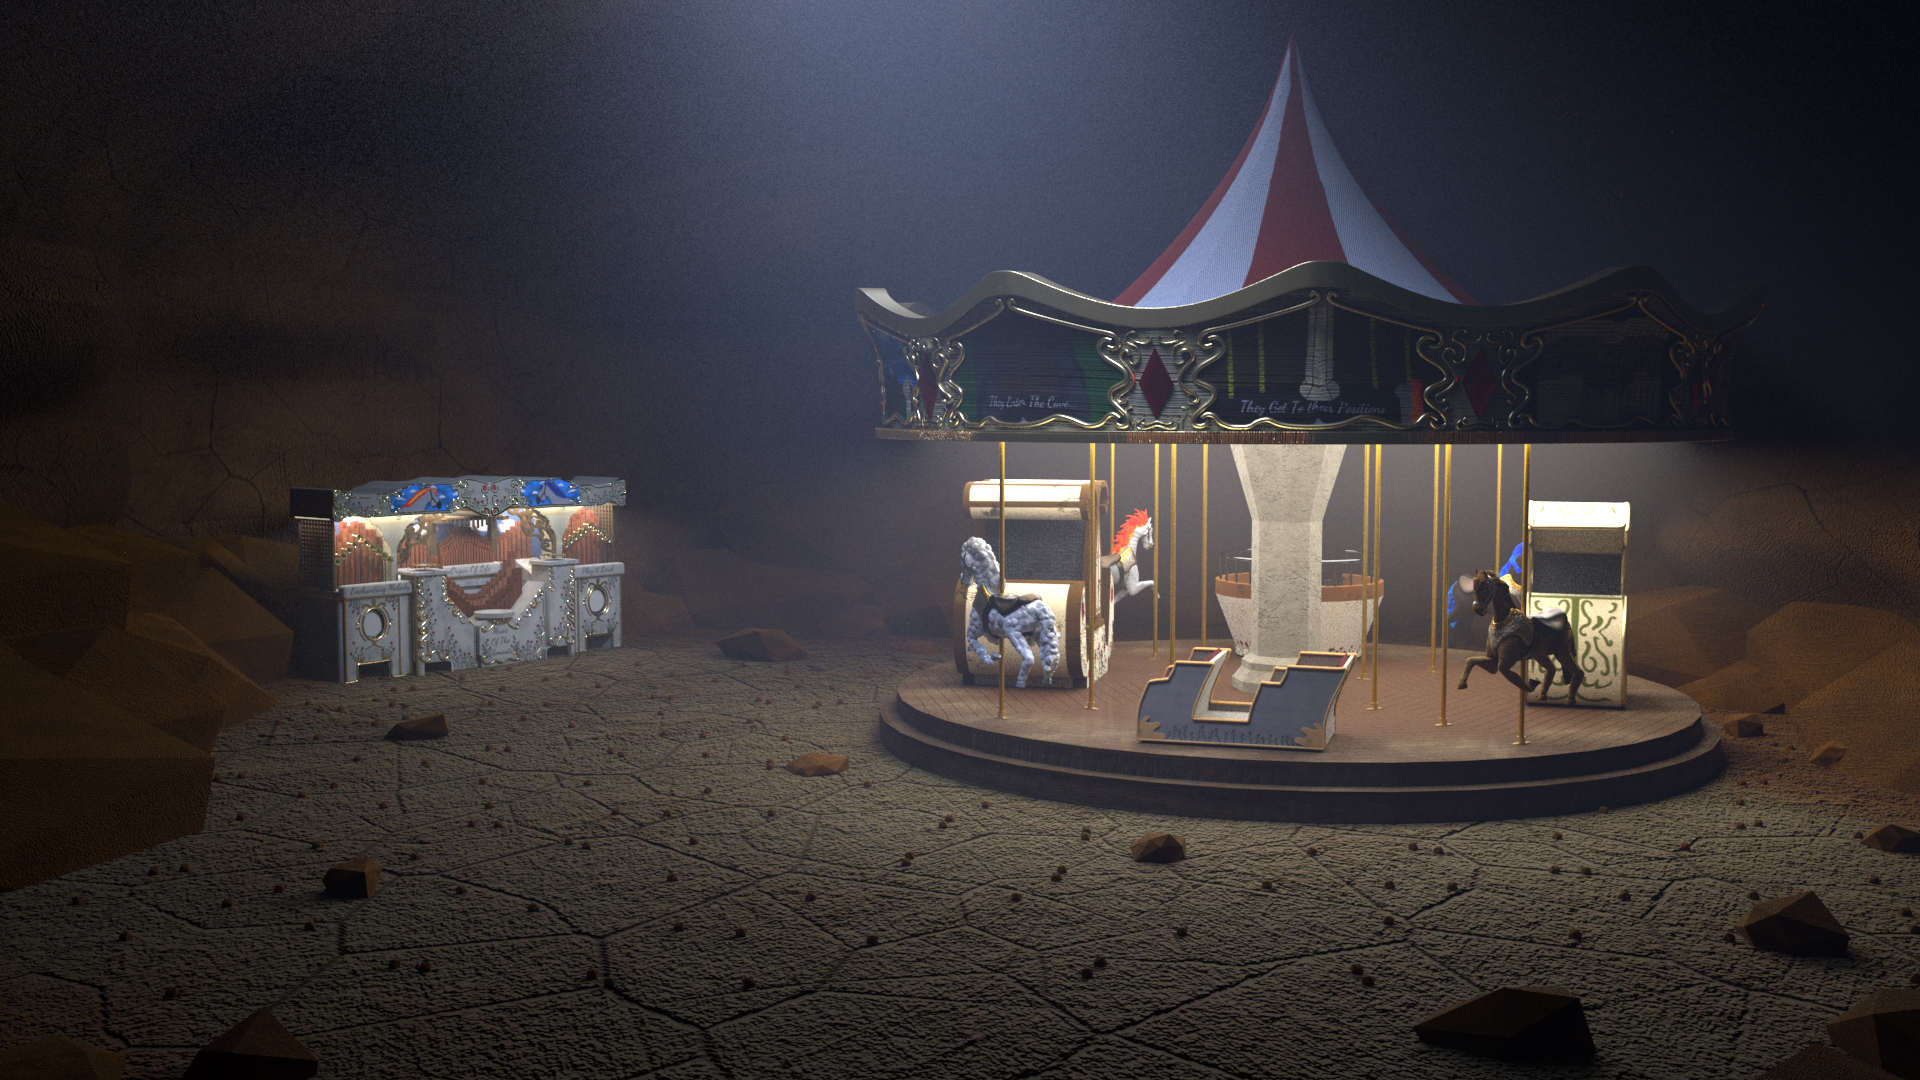 A CG Animation by Max Rozier showing a colourful and mysterious 3D animation of a Carousel and a Fairground organ.